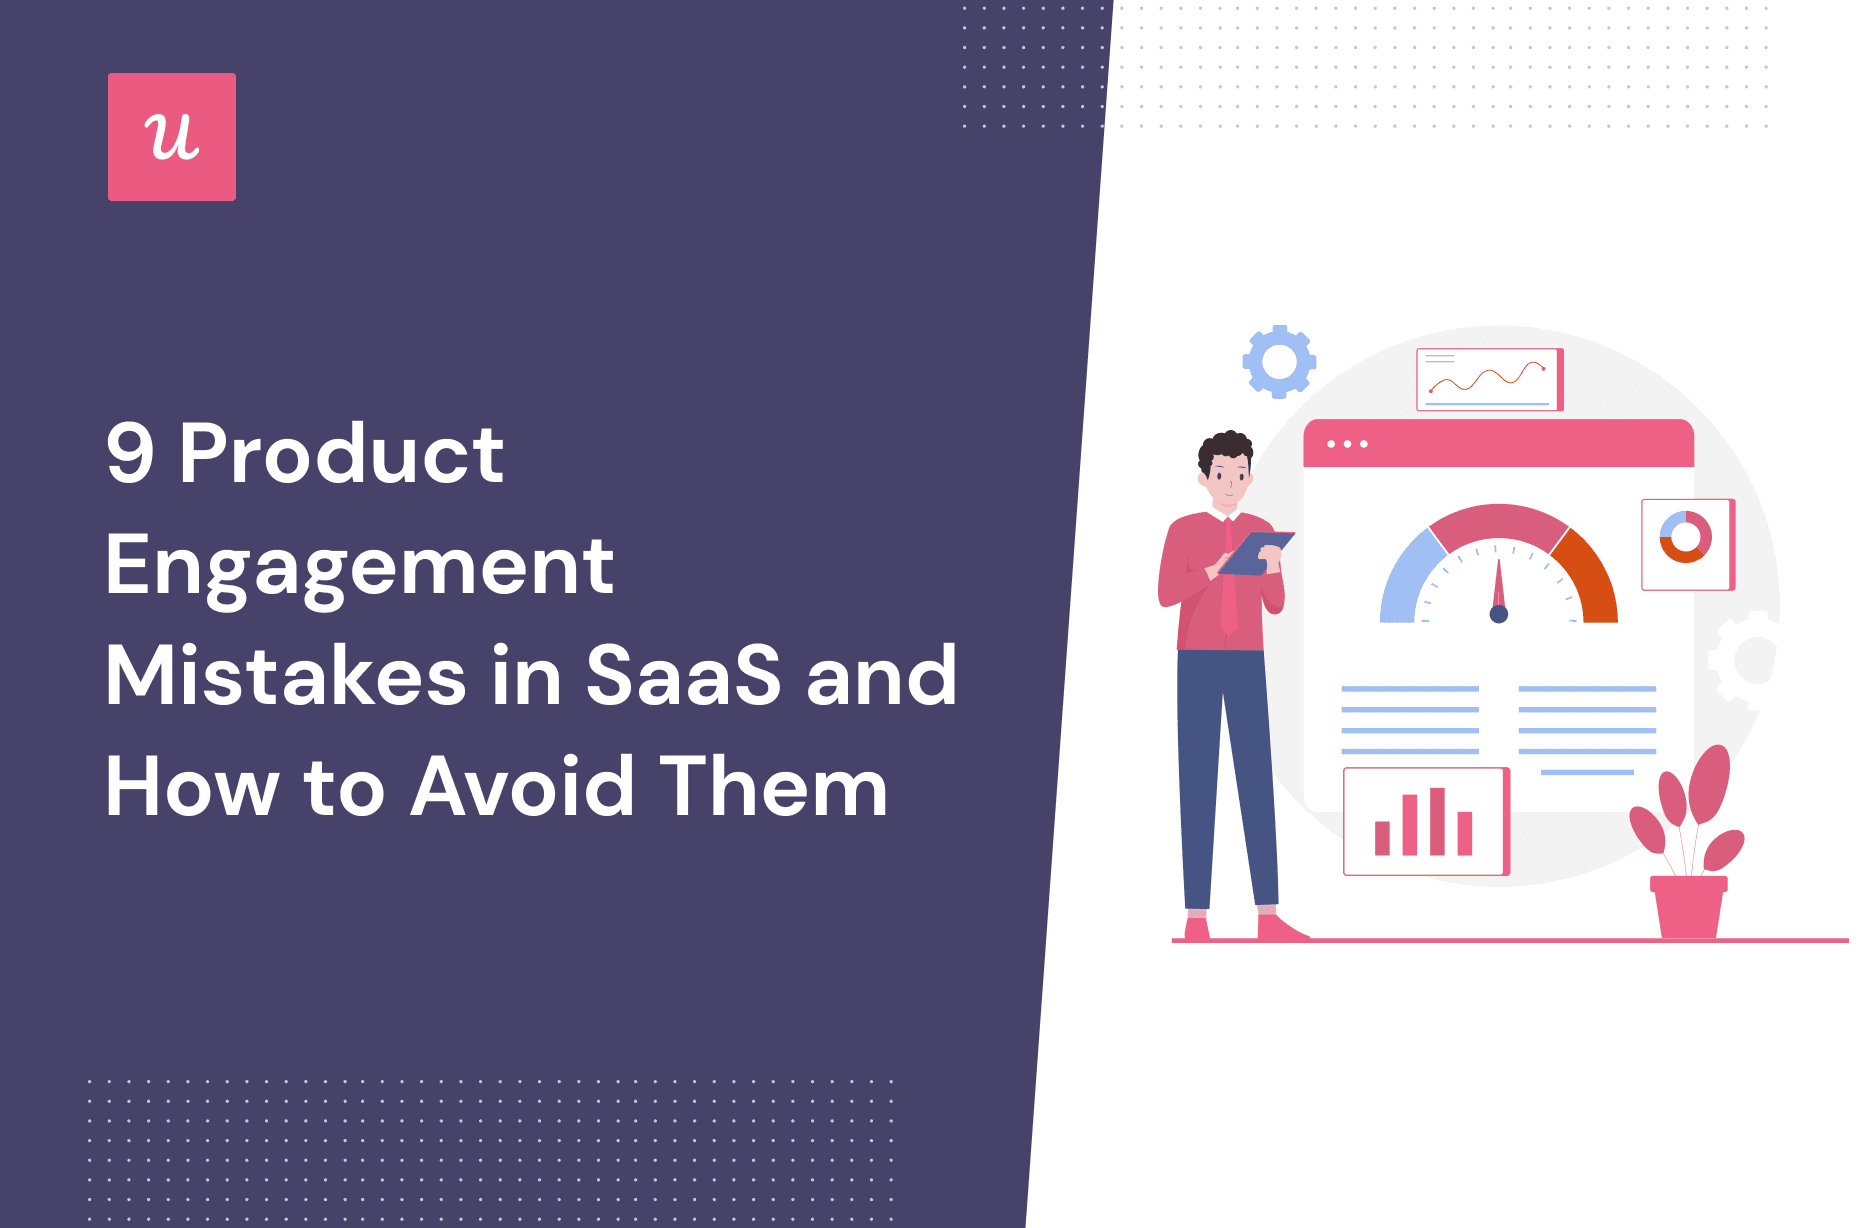 9 Product Engagement Mistakes in SaaS and How to Avoid Them